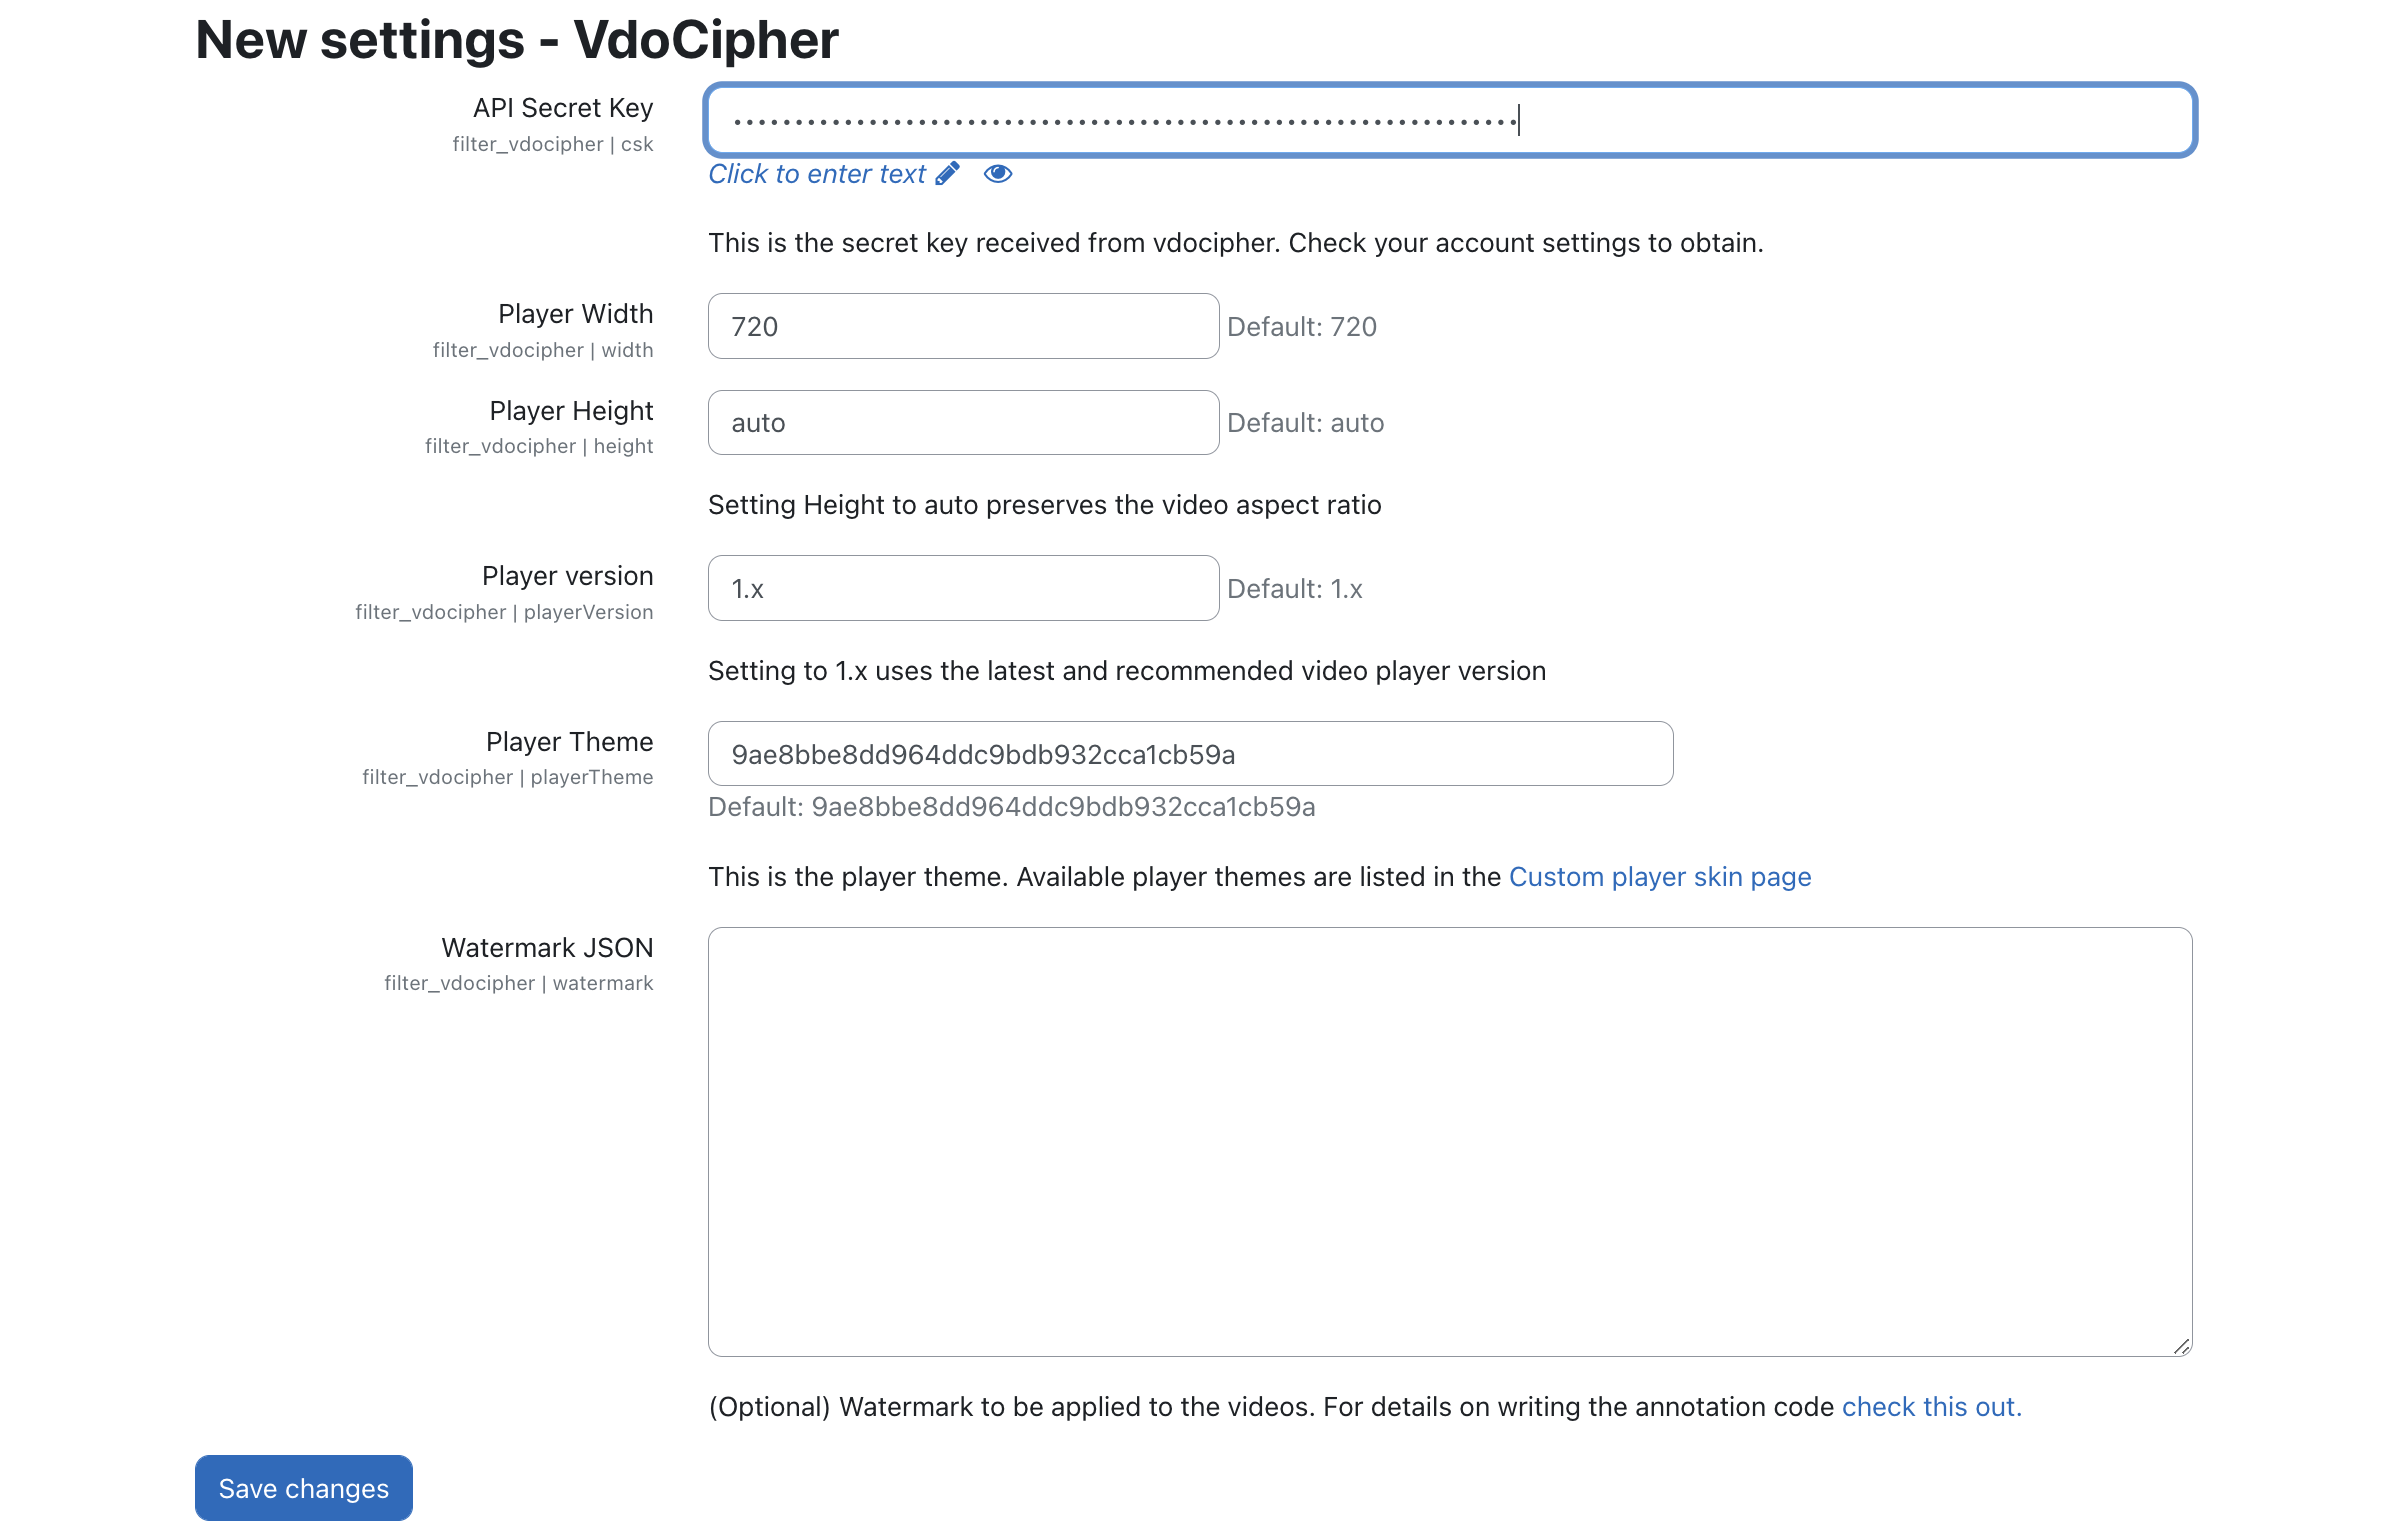 Settings page of the moodle vdocipher plugin